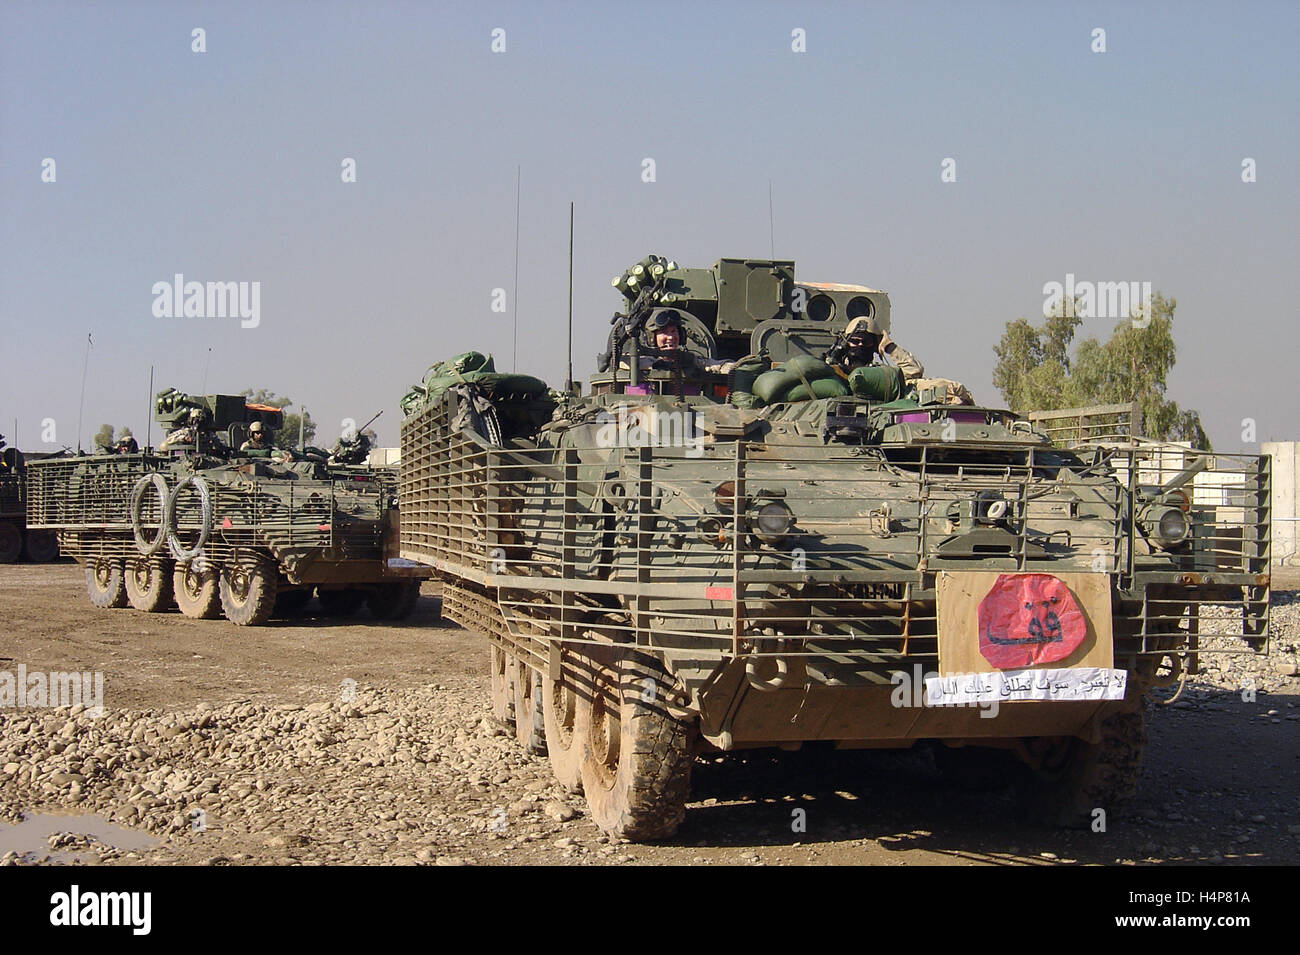 25th November 2004 U.S. Army M1134 ATGM (Anti-Tank Guided Missile) Vehicles at FOB Marez in Mosul. Stock Photo